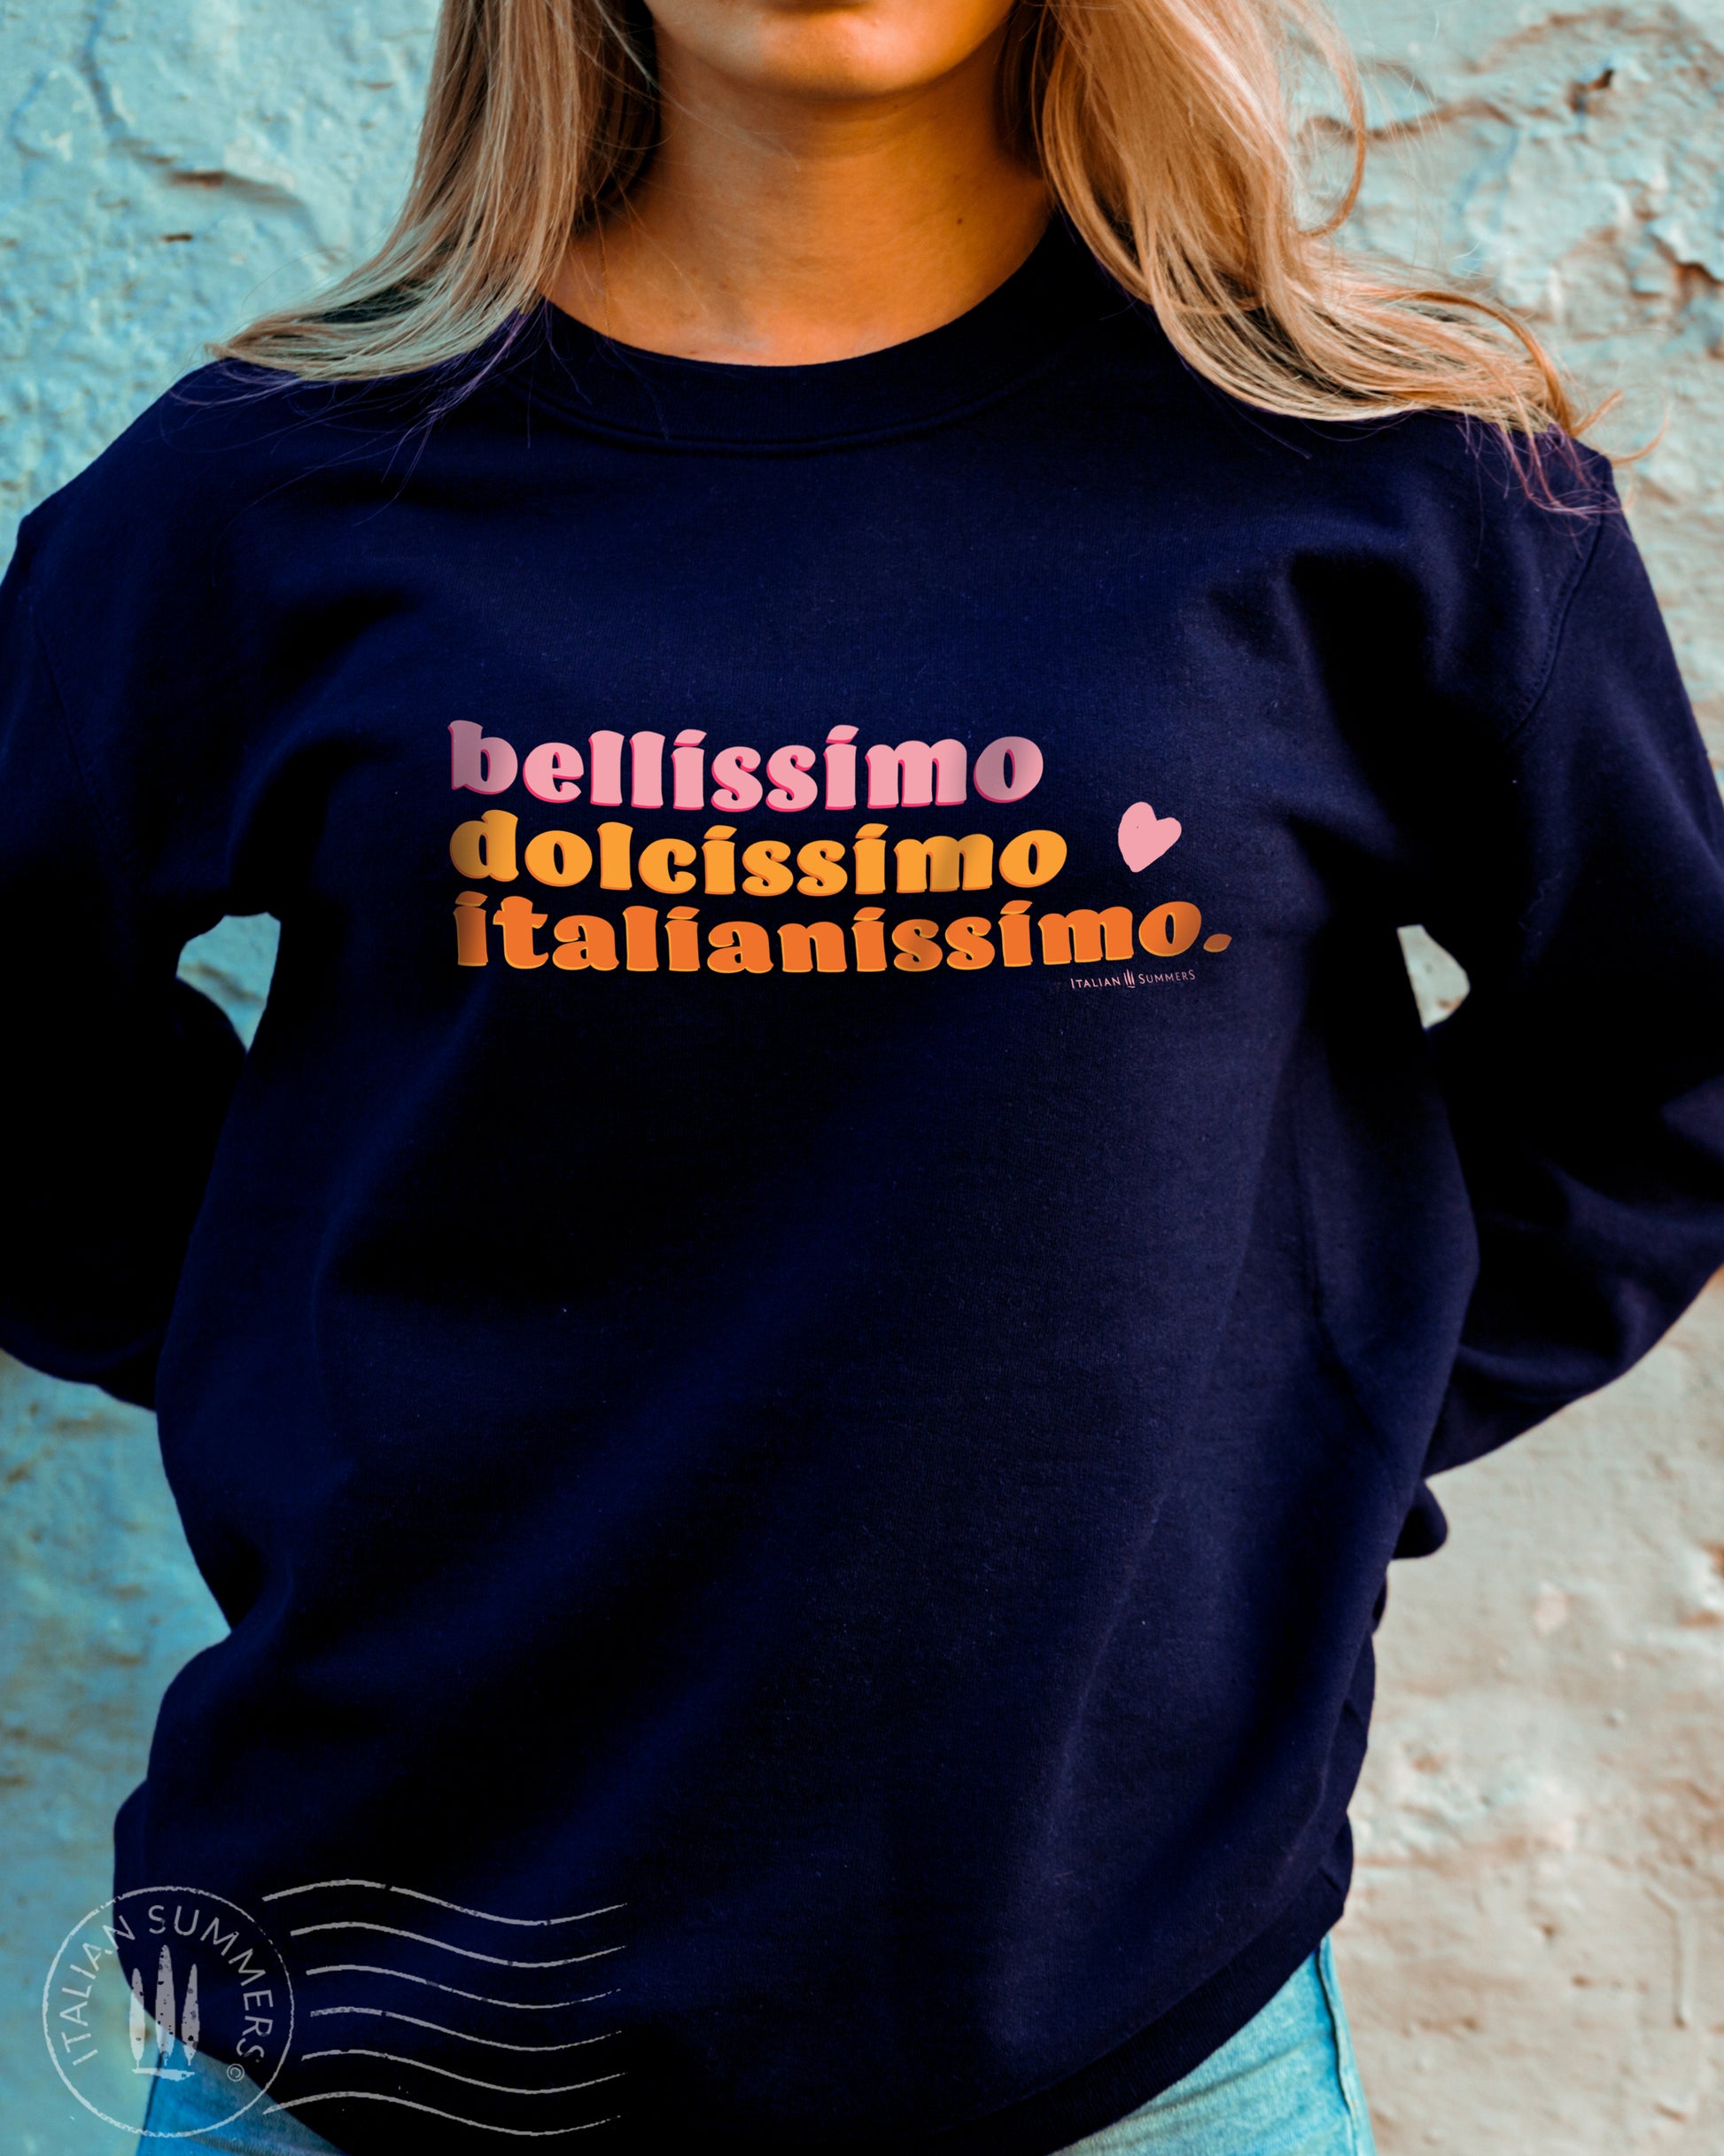 Italy inspired soft and cozy cotton blend sweatshirt with 1970s  pink,sunflower-yellow and orange retro font text  Bellissimo Dolcissimo Italianissimo.